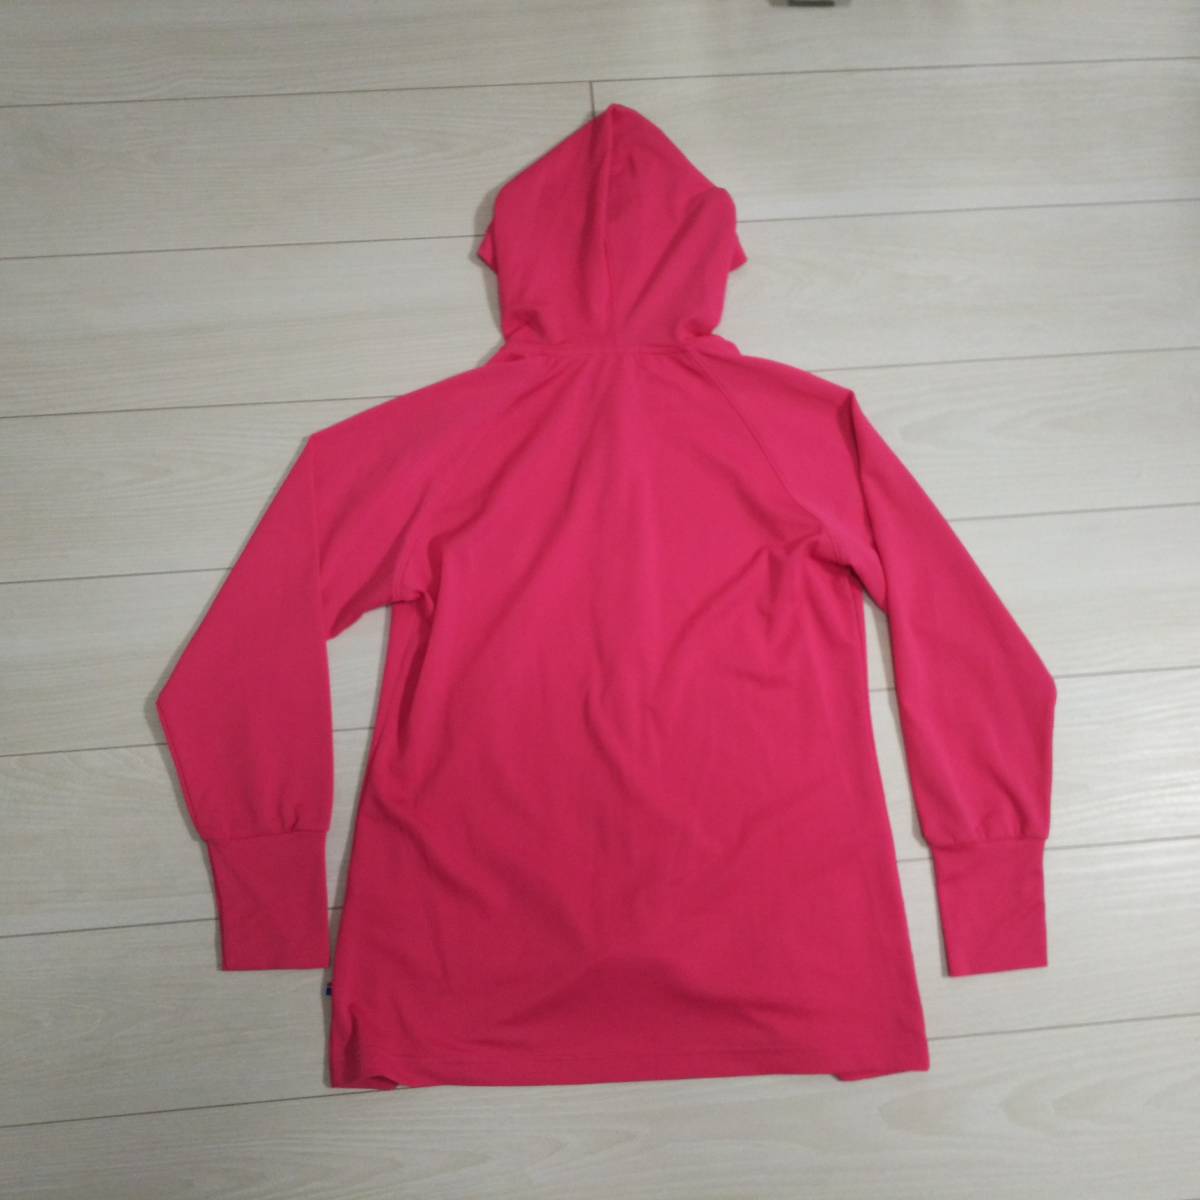 *ELLE SPORT L sport long sleeve tops with a hood . thin jacket L size pink *